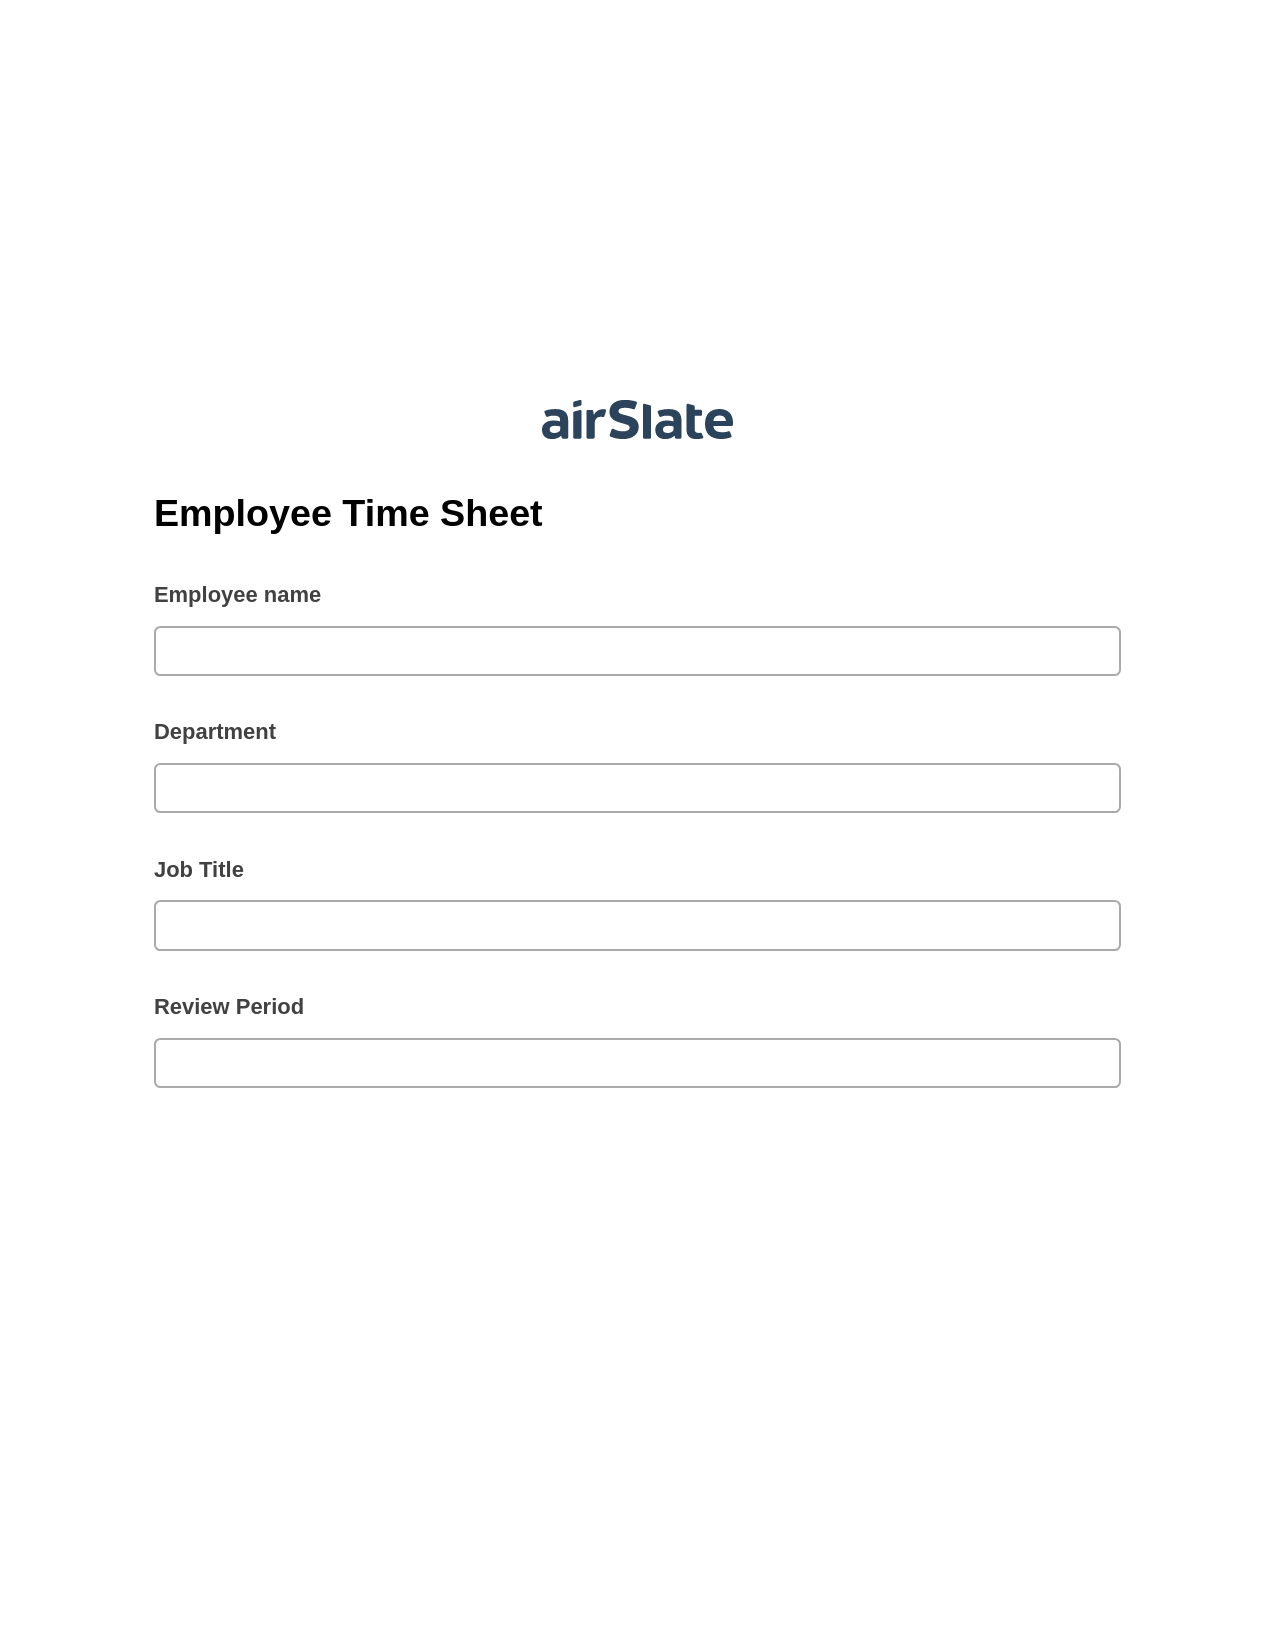 Employee Time Sheet Pre-fill from CSV File Bot, Update Audit Trail Bot, Text Message Notification Postfinish Bot